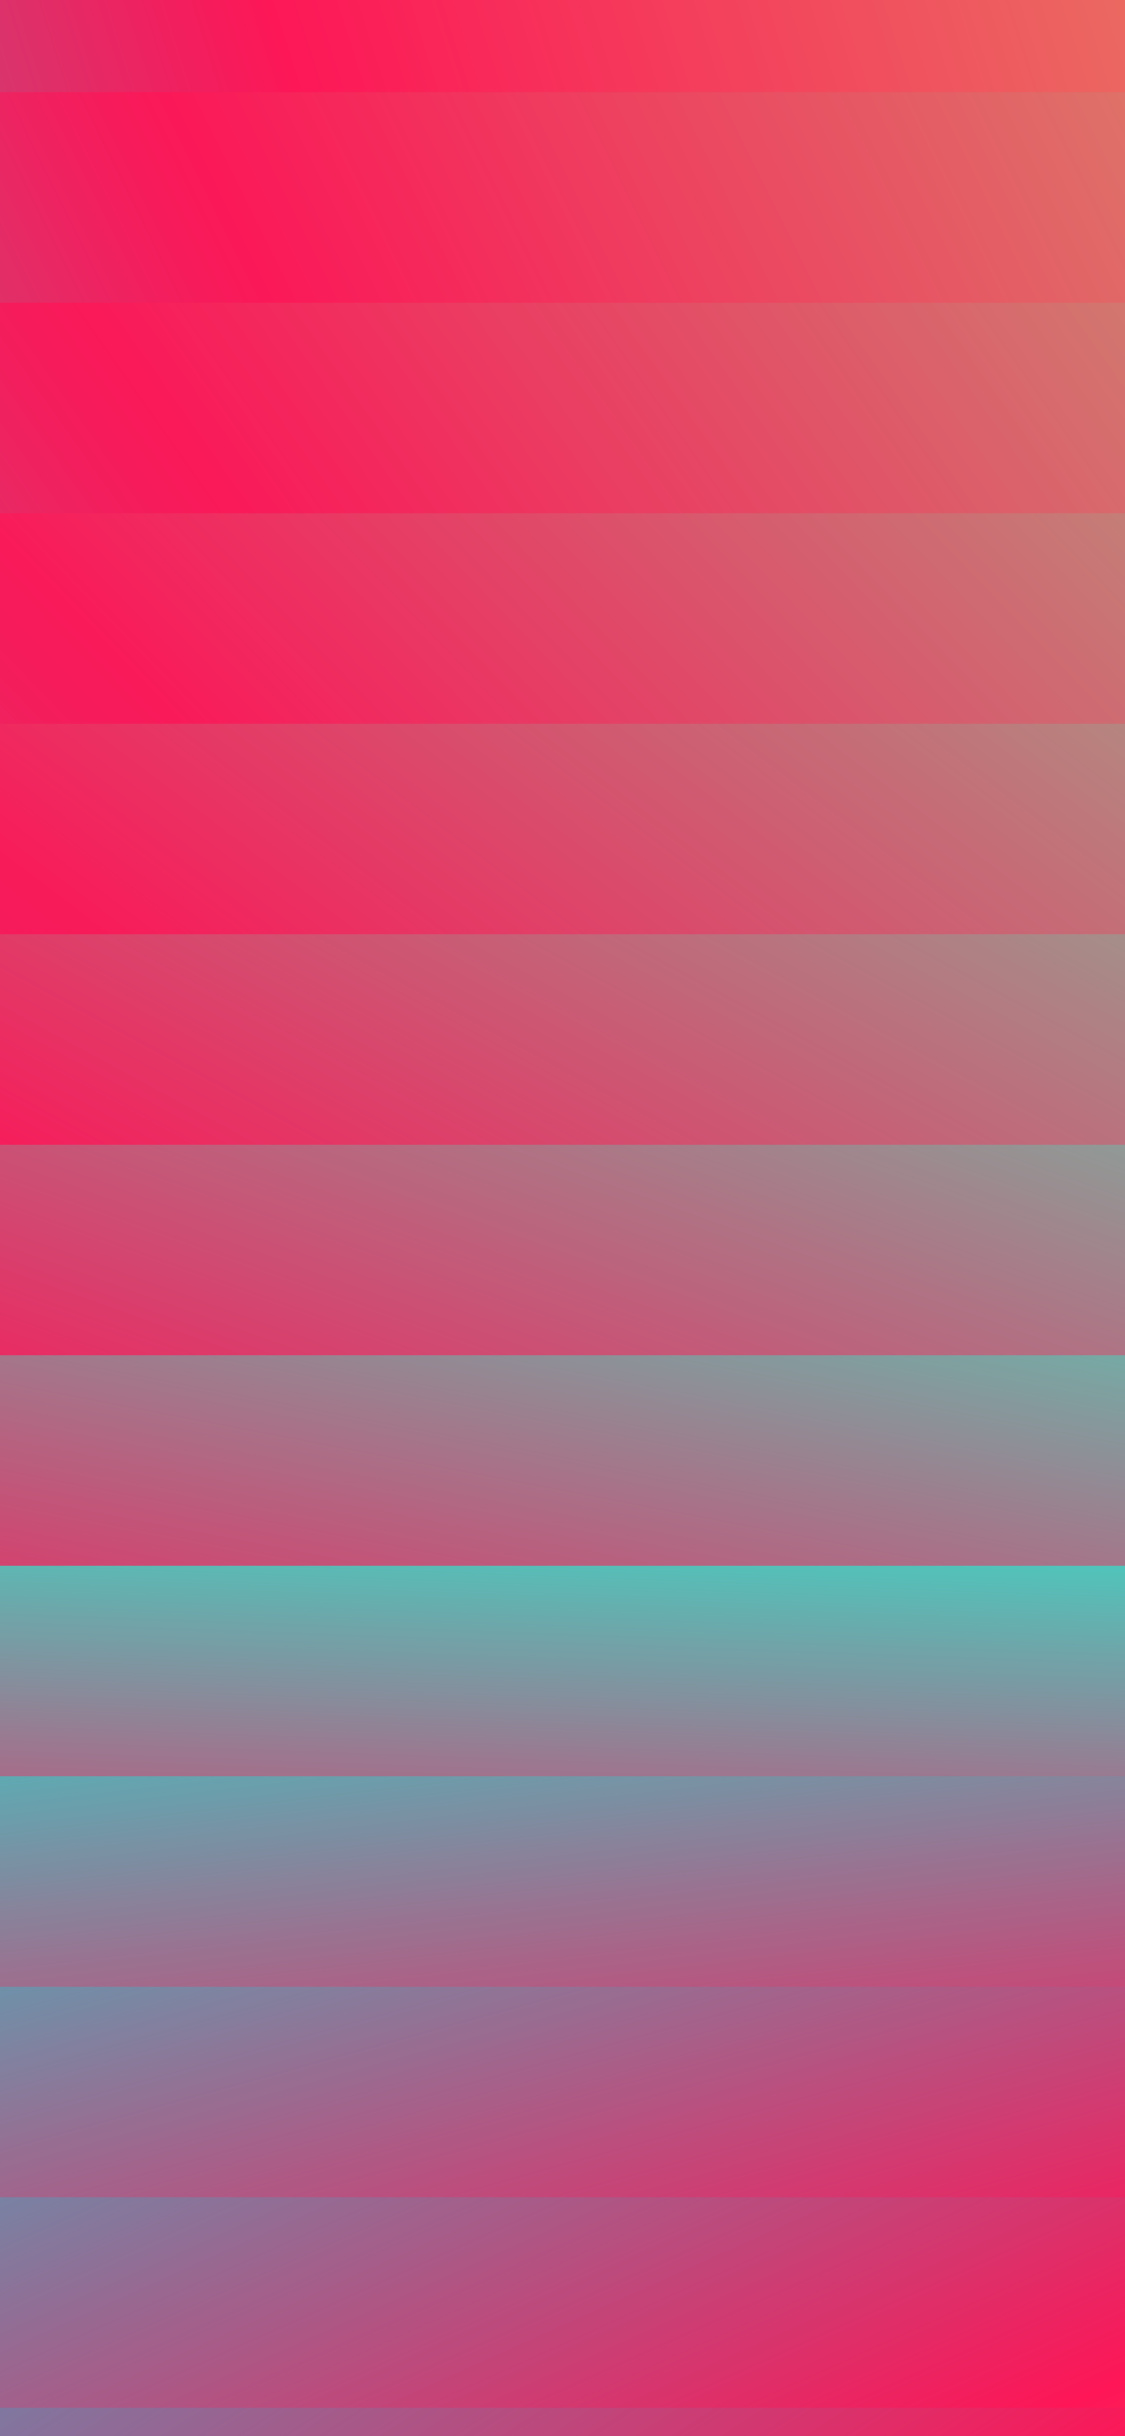 HD gradient steps, Phone wallpaper, Colorful visuals, Dynamic backgrounds, 1130x2440 HD Phone